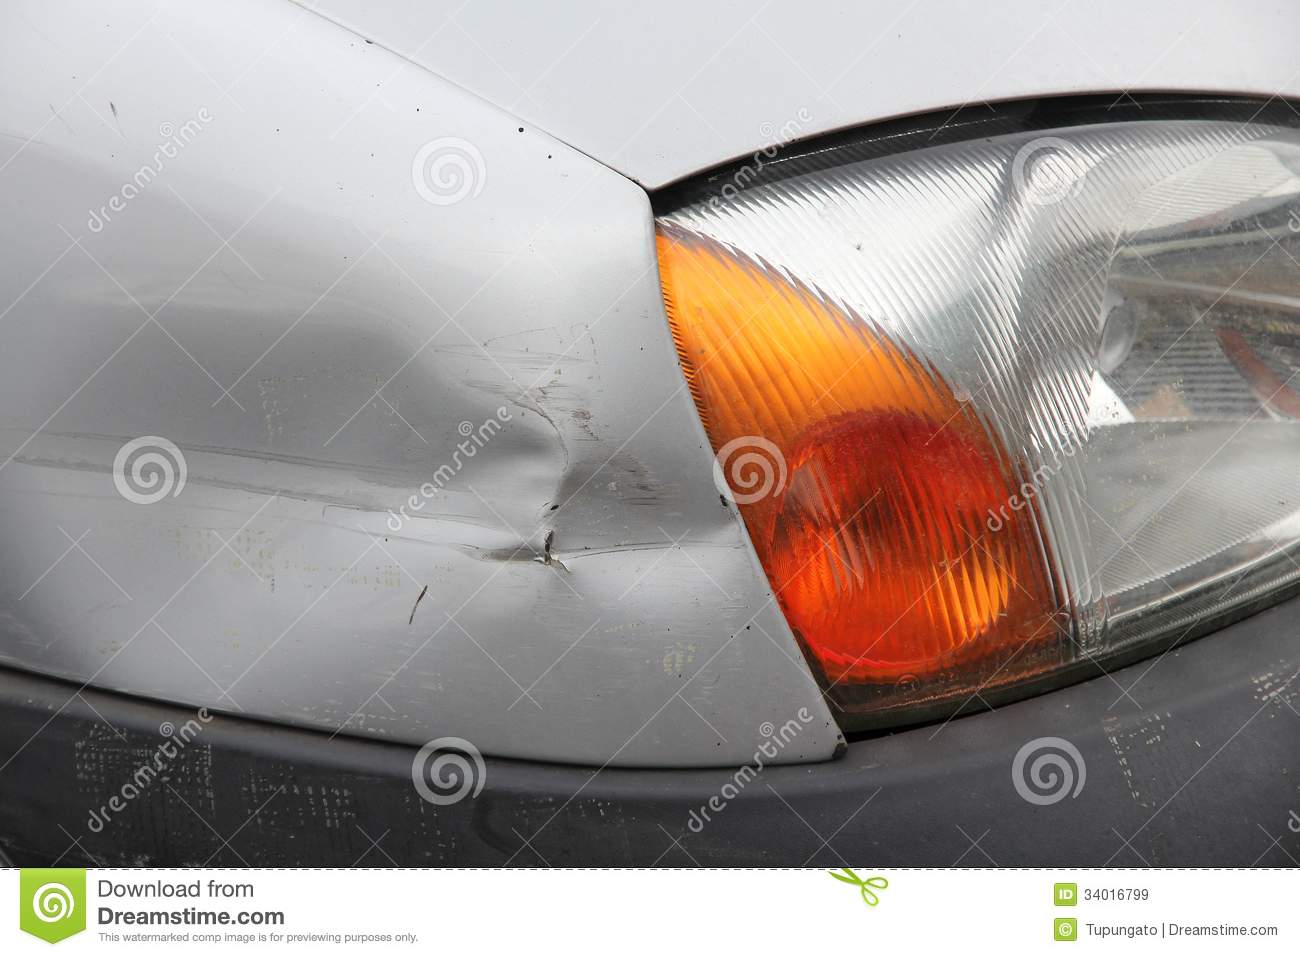 Dented Car Royalty Free Stock Images   Image  34016799